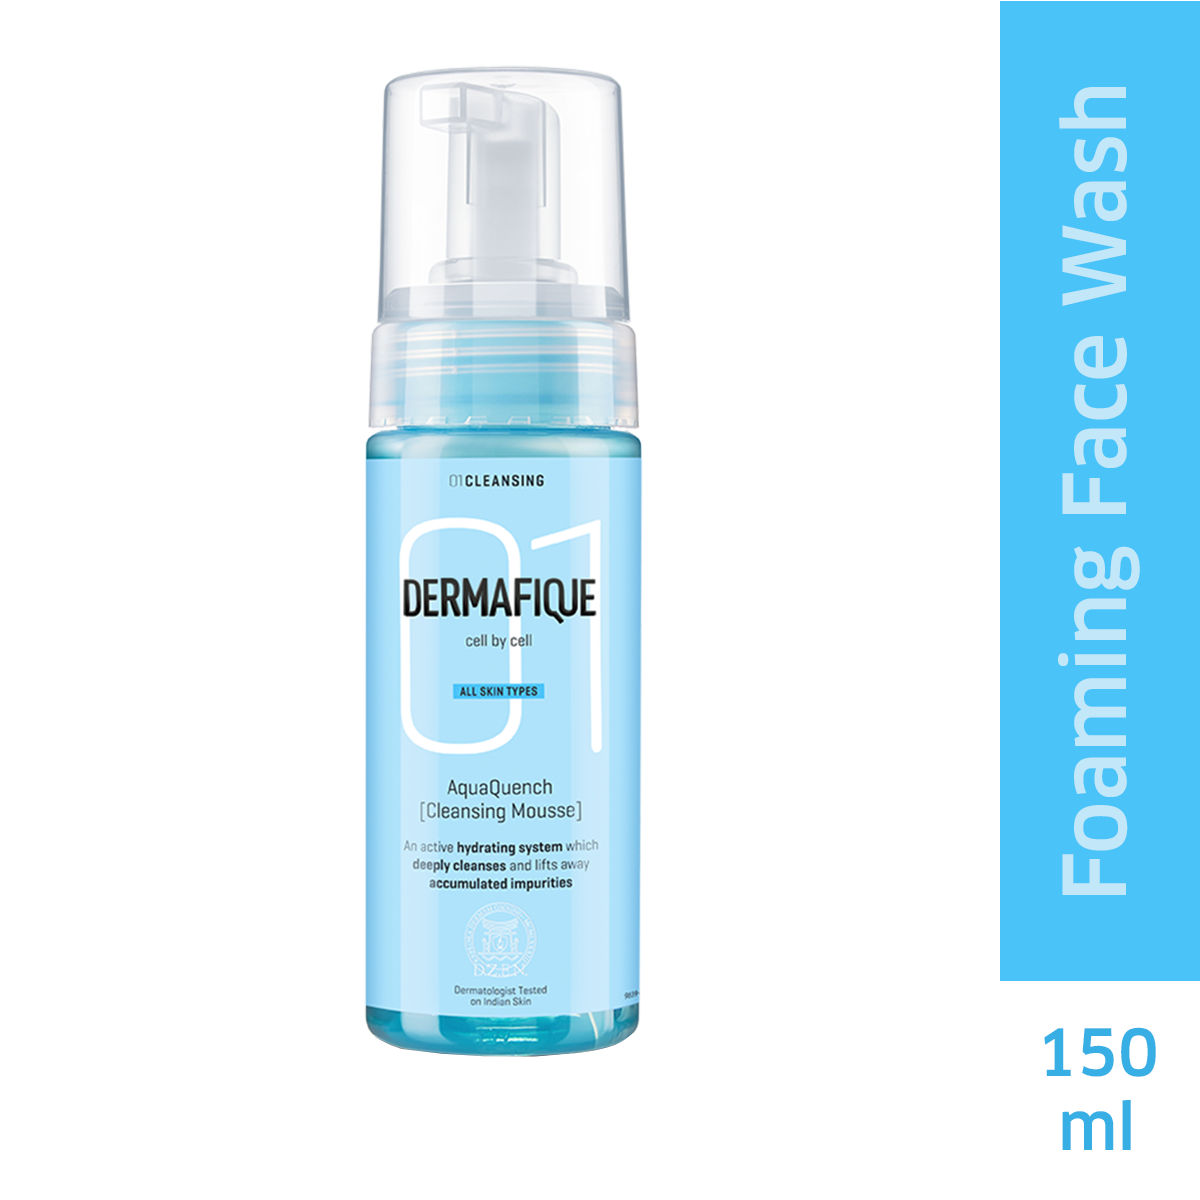 Dermafique Aquaquench Cleansing Mousse, Foaming Face wash with Vitamin E, B5 & Amino Acids